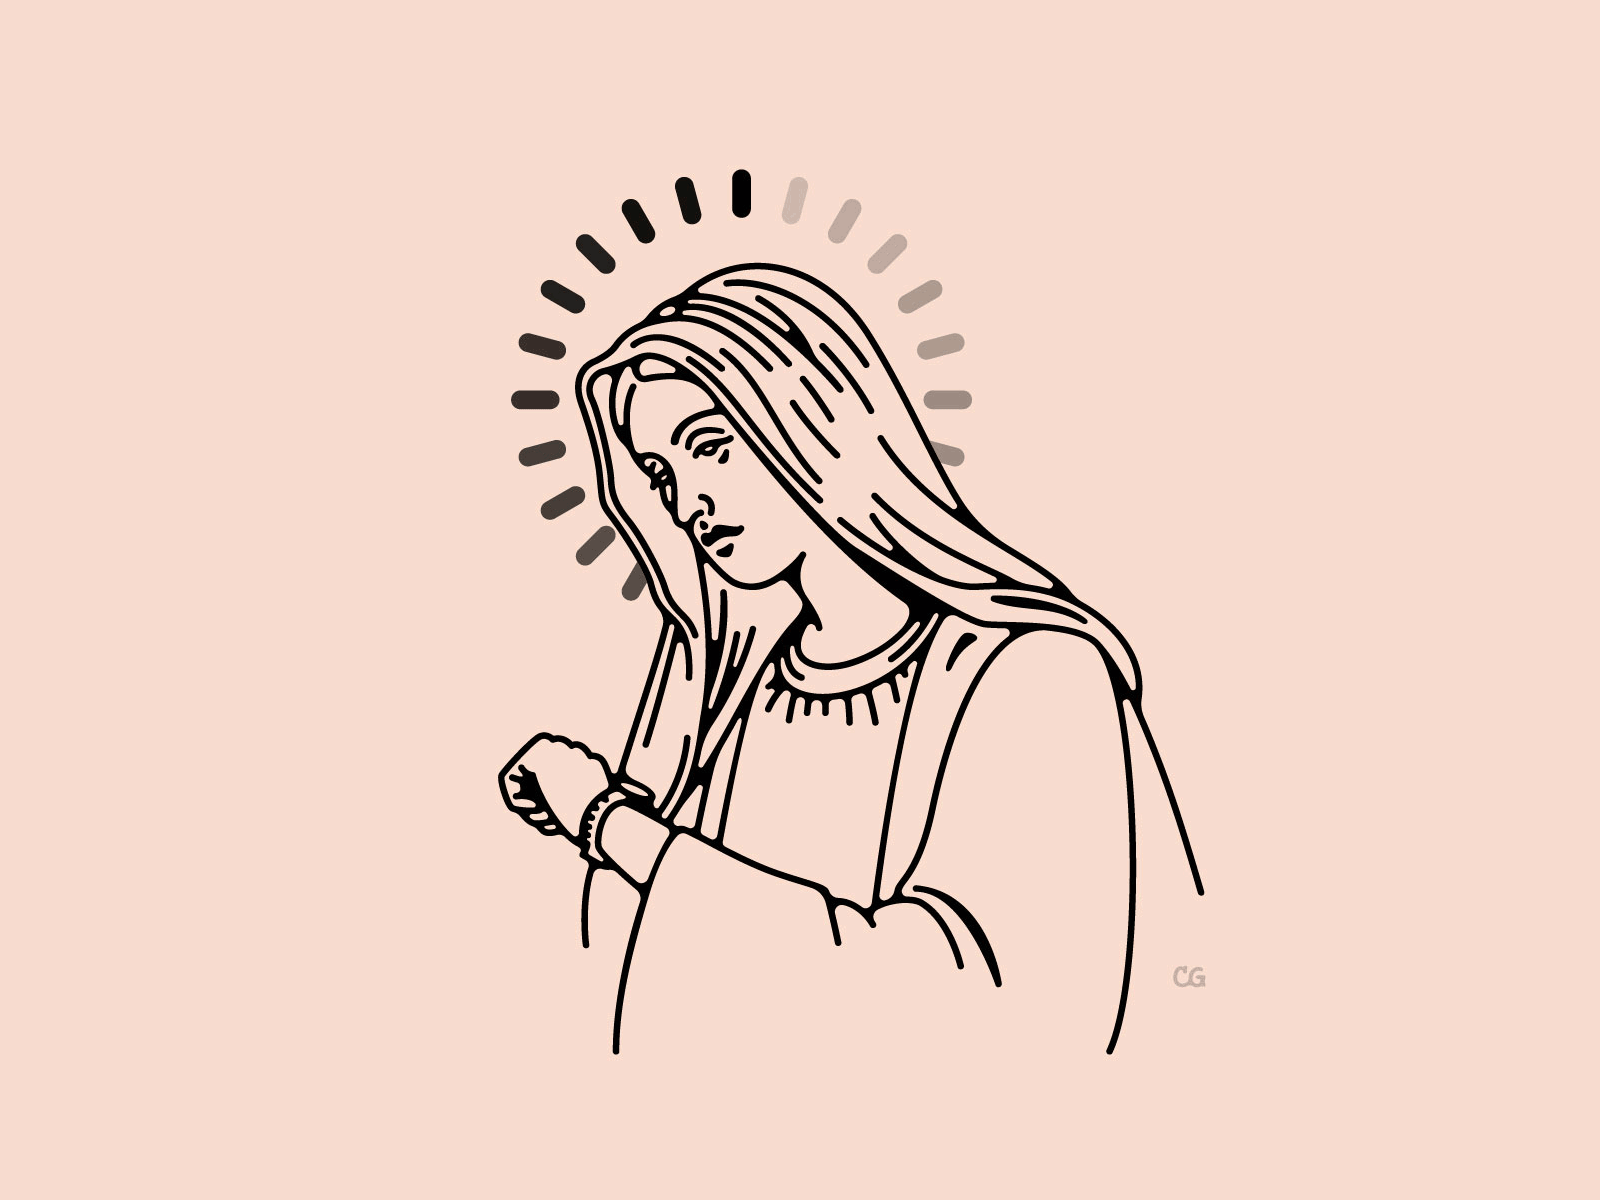 What is she waiting for? abstract christian design digital art double meaning flat gif illustration loading loading animation logo madonna minimal motion vector virgin mary wait wit